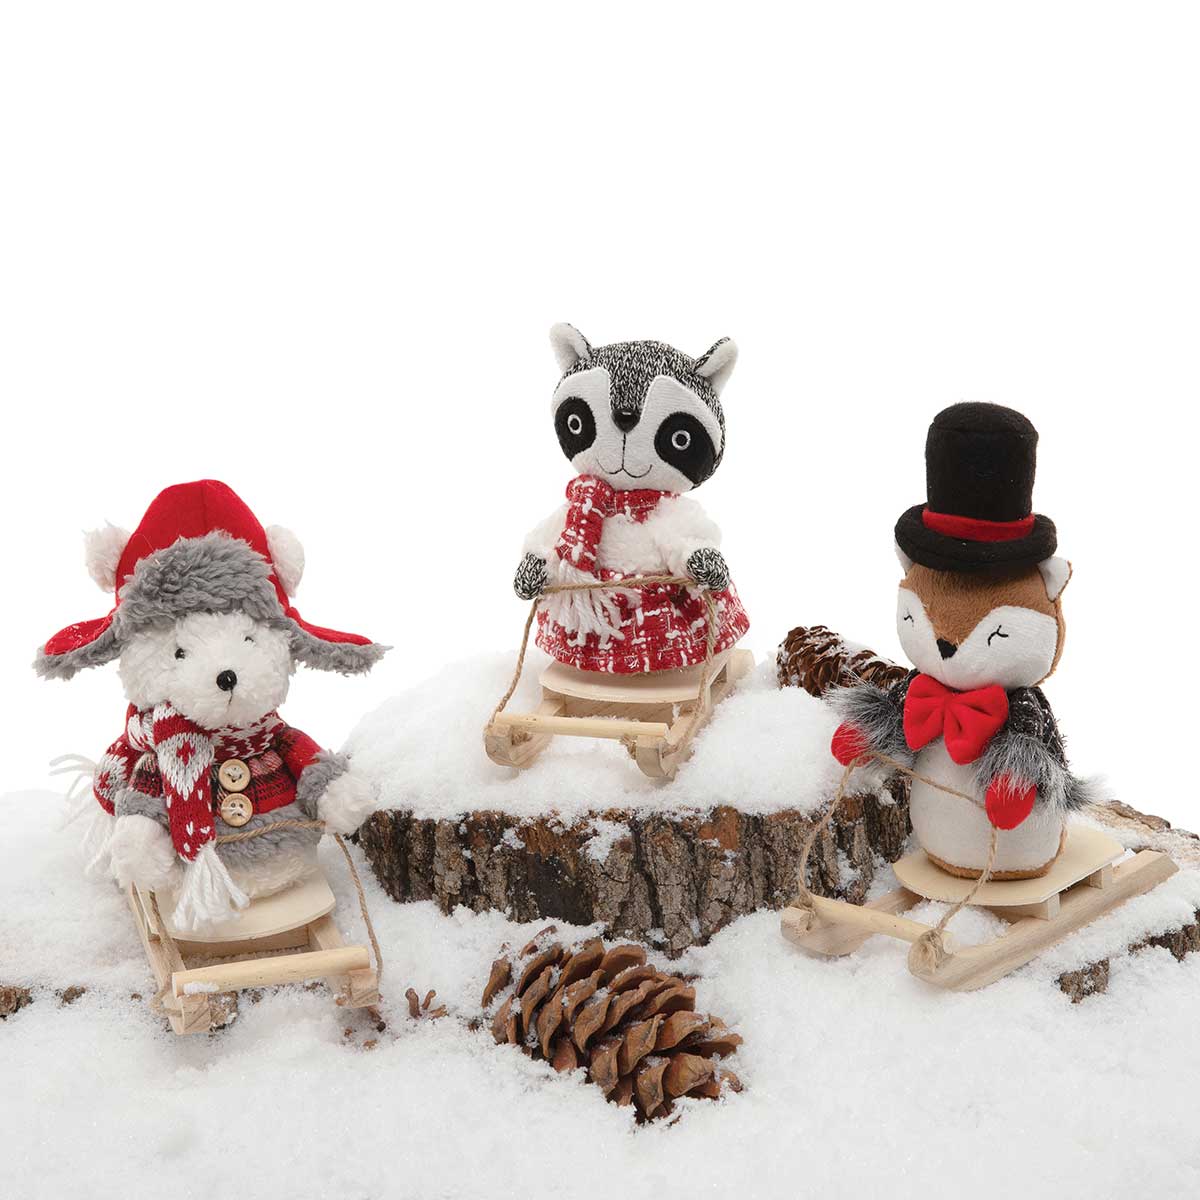 RACCOON WINTER ON SLED 3IN X 7IN X 6IN GY/RE/WH WITH SWEATER - Click Image to Close